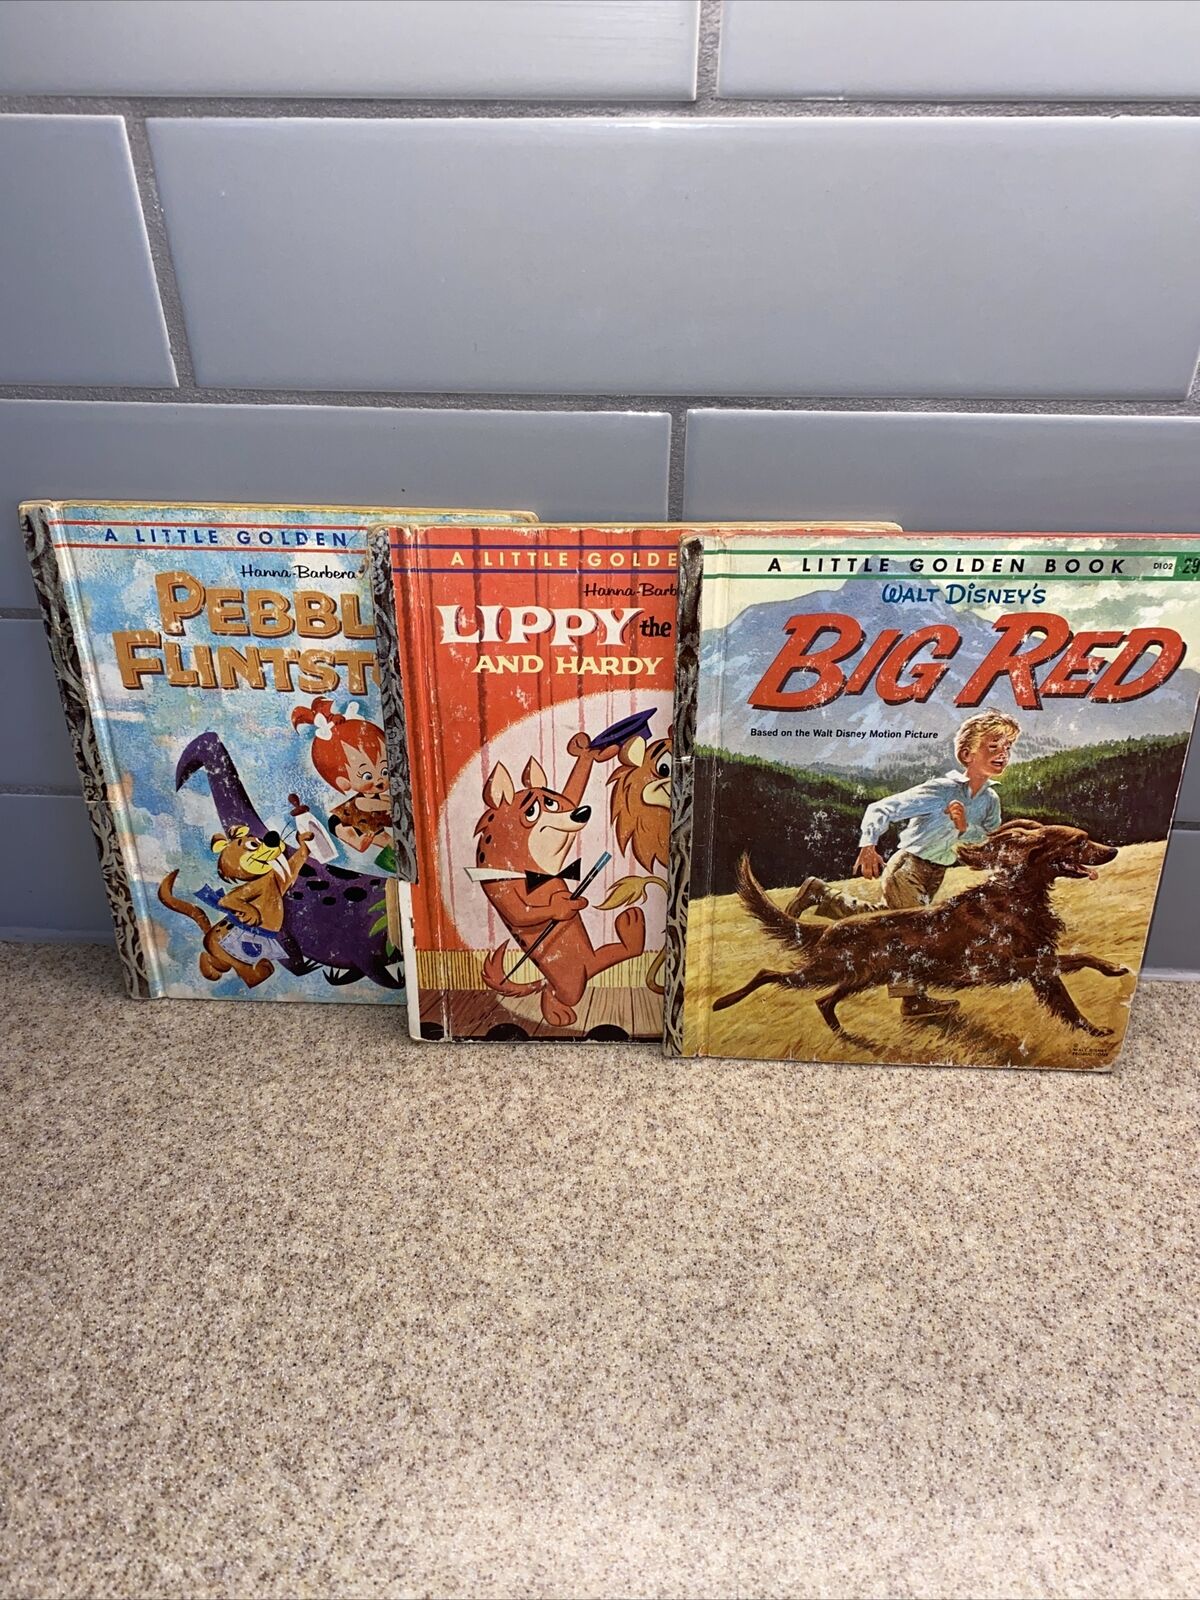 Lot of 3 1960’s Hanna Barbera and Disney Books, Some Ware on covers.